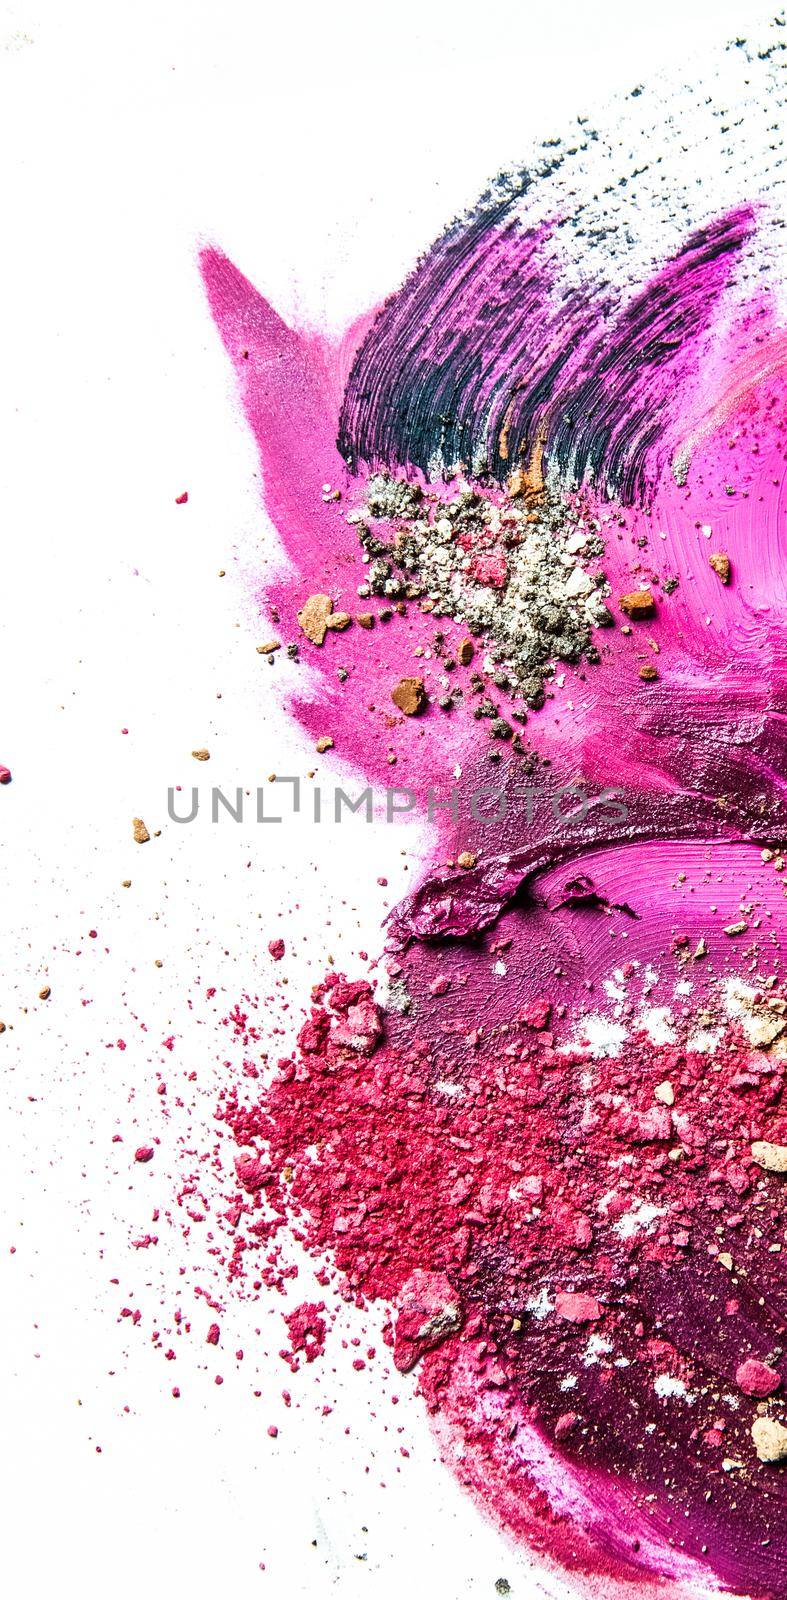 Artistic lipstick smudge and crushed eyeshadow as background by Anneleven